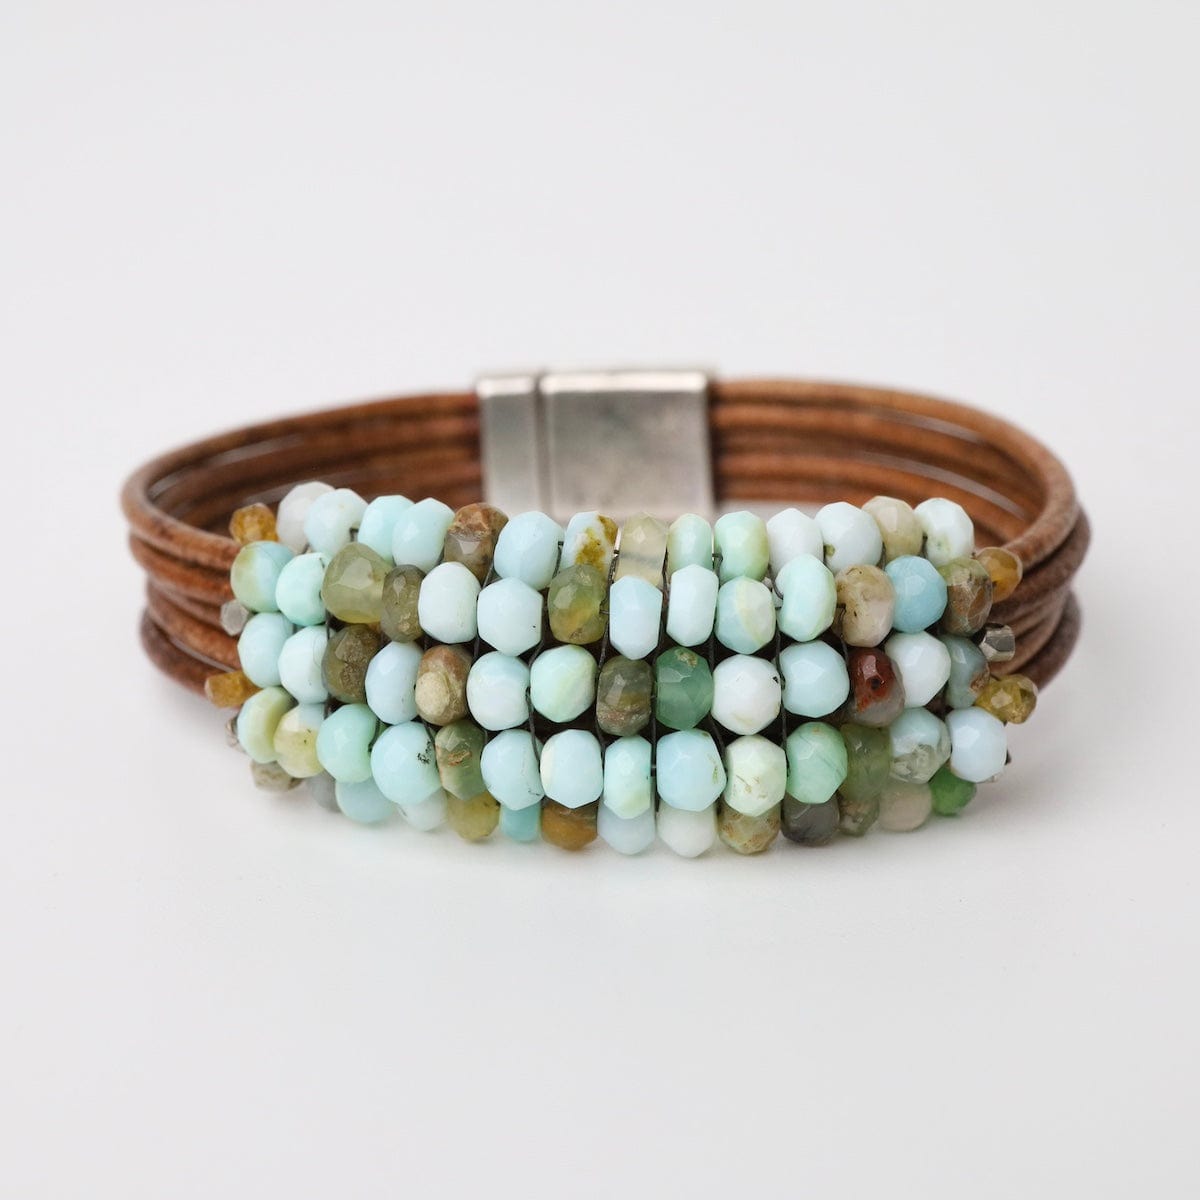 BRC-JM Hand Stitched Green Opal with Silver Nugget Leather Bracelet